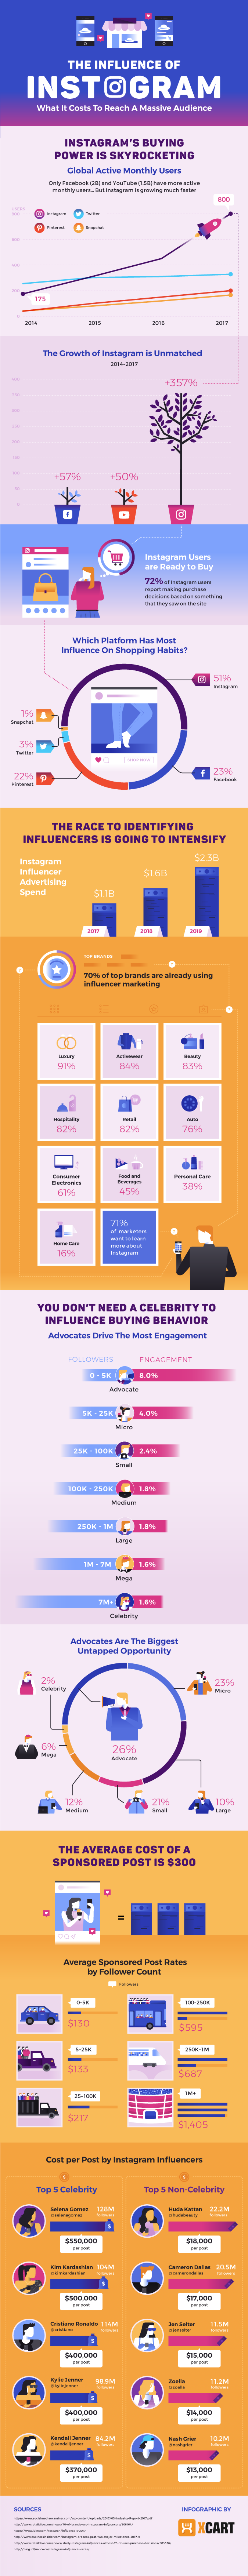 The Influence of Instagram - #infographic